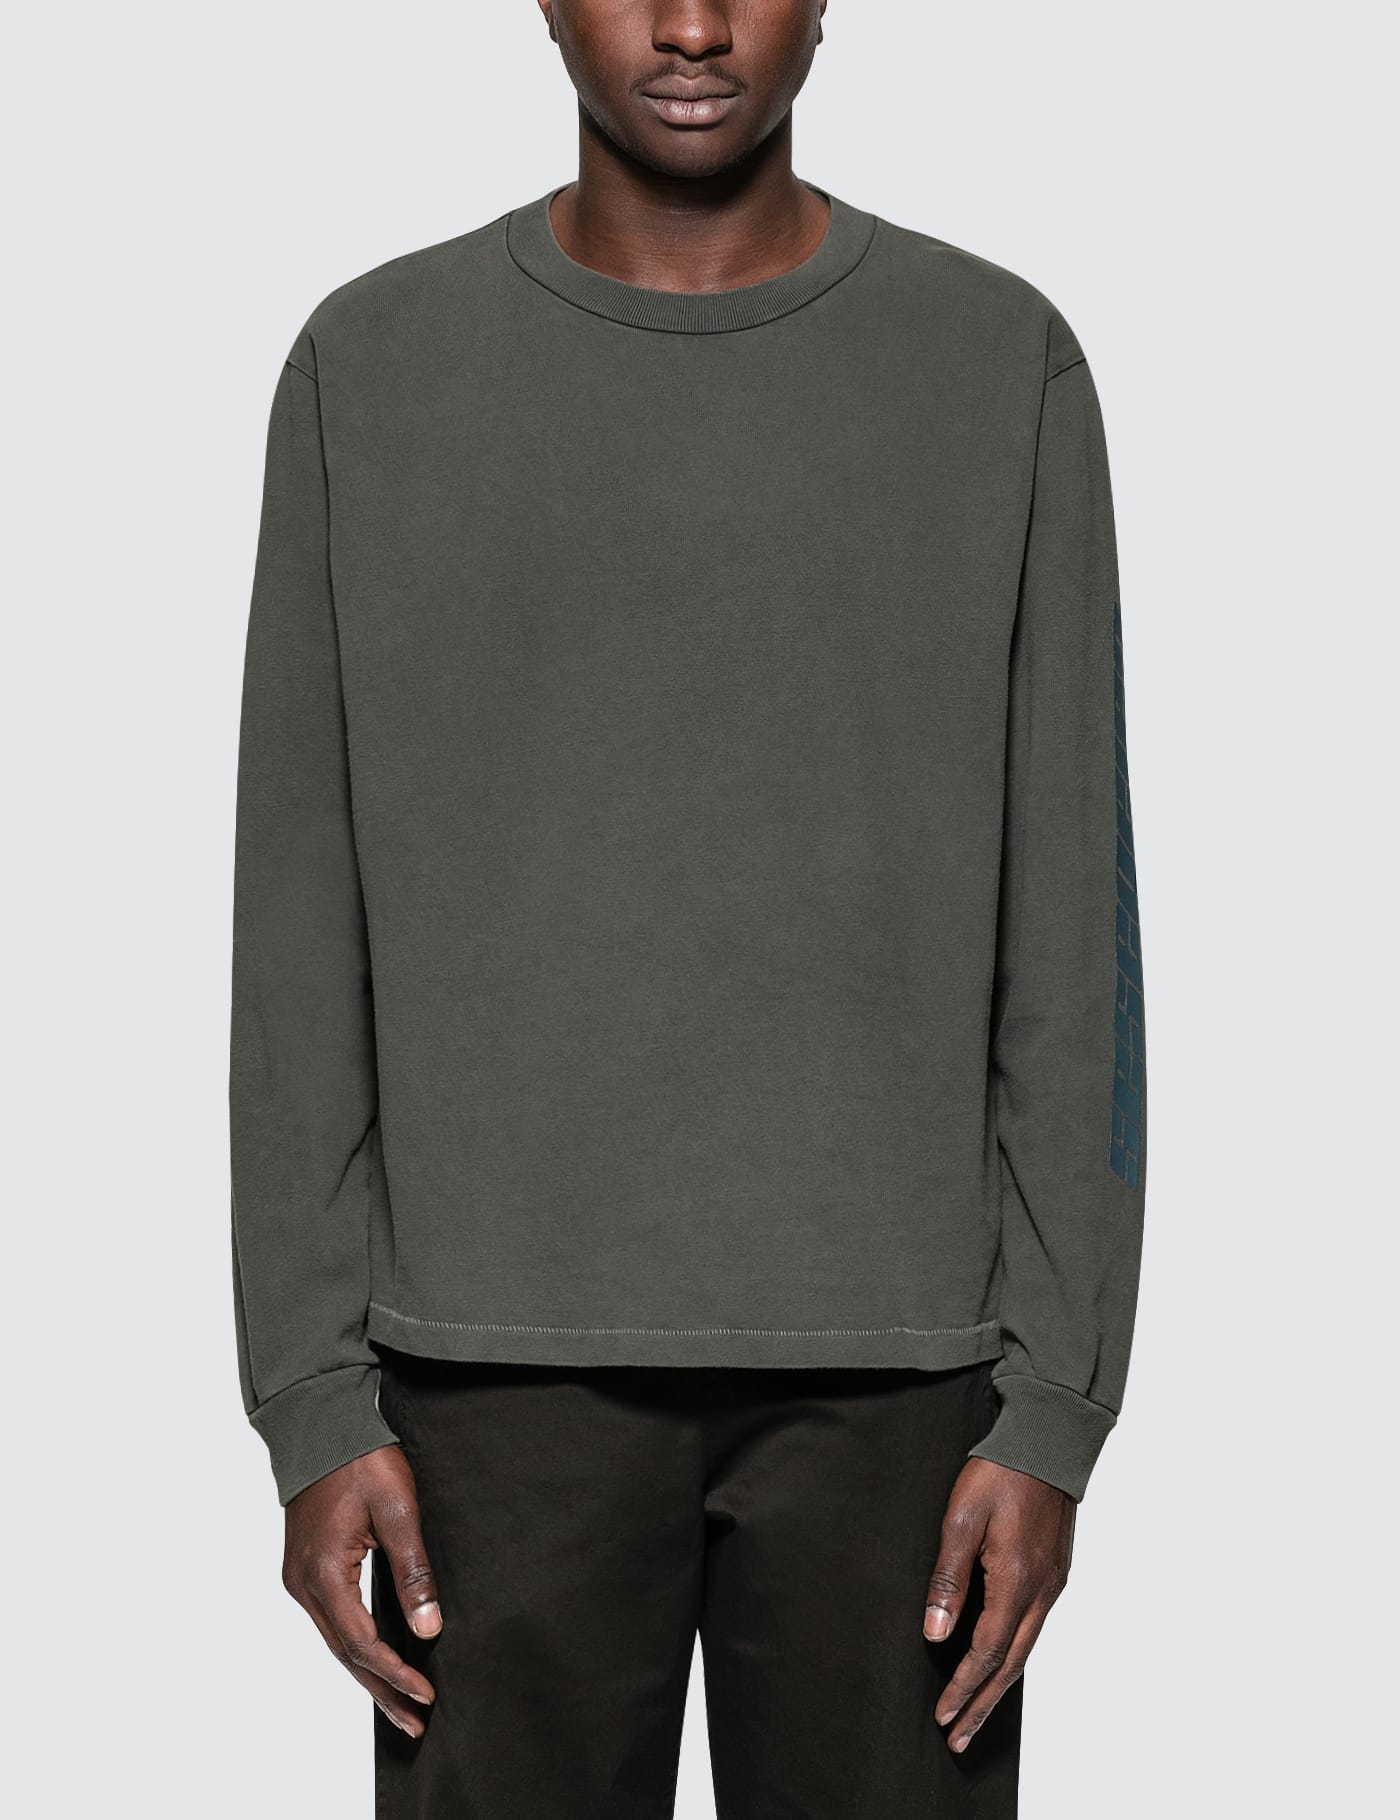 Yeezy - Calabasas L/S T-Shirt | HBX - Globally Curated Fashion and